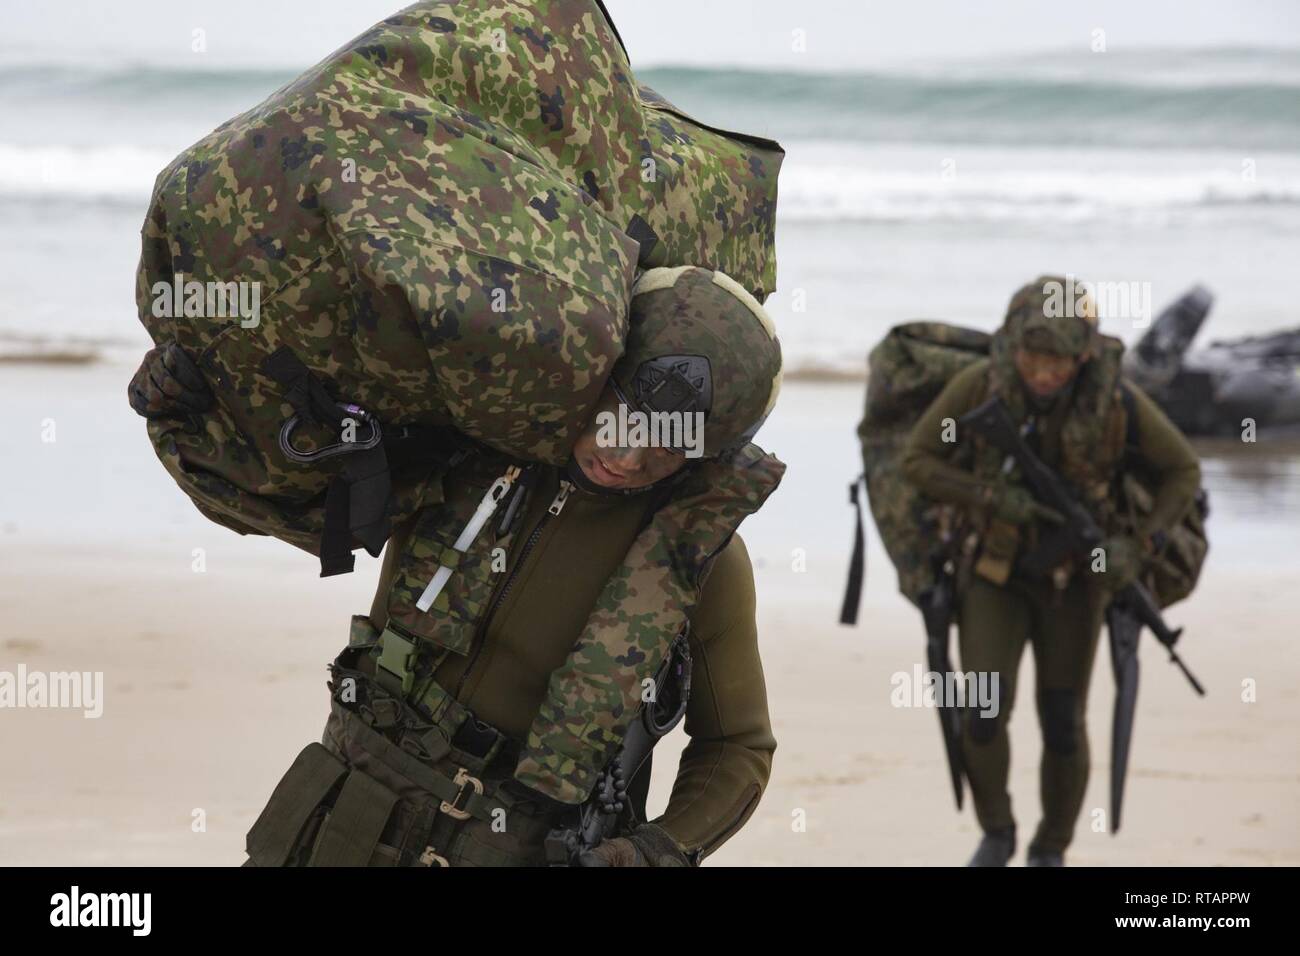 Japan Ground Self-Defense Force (JGSDF) Soldiers carry gear inland after performing a surf passage in combat rubber raiding crafts during Iron Fist 2019, Feb. 1, on U.S. Marine Corps Base Camp Pendleton, CA. Exercise Iron Fist is an annual, multilateral training exercise where U.S. and Japanese service members train together and share techniques, tactics and procedures to improve their combined operational capabilities. Stock Photo